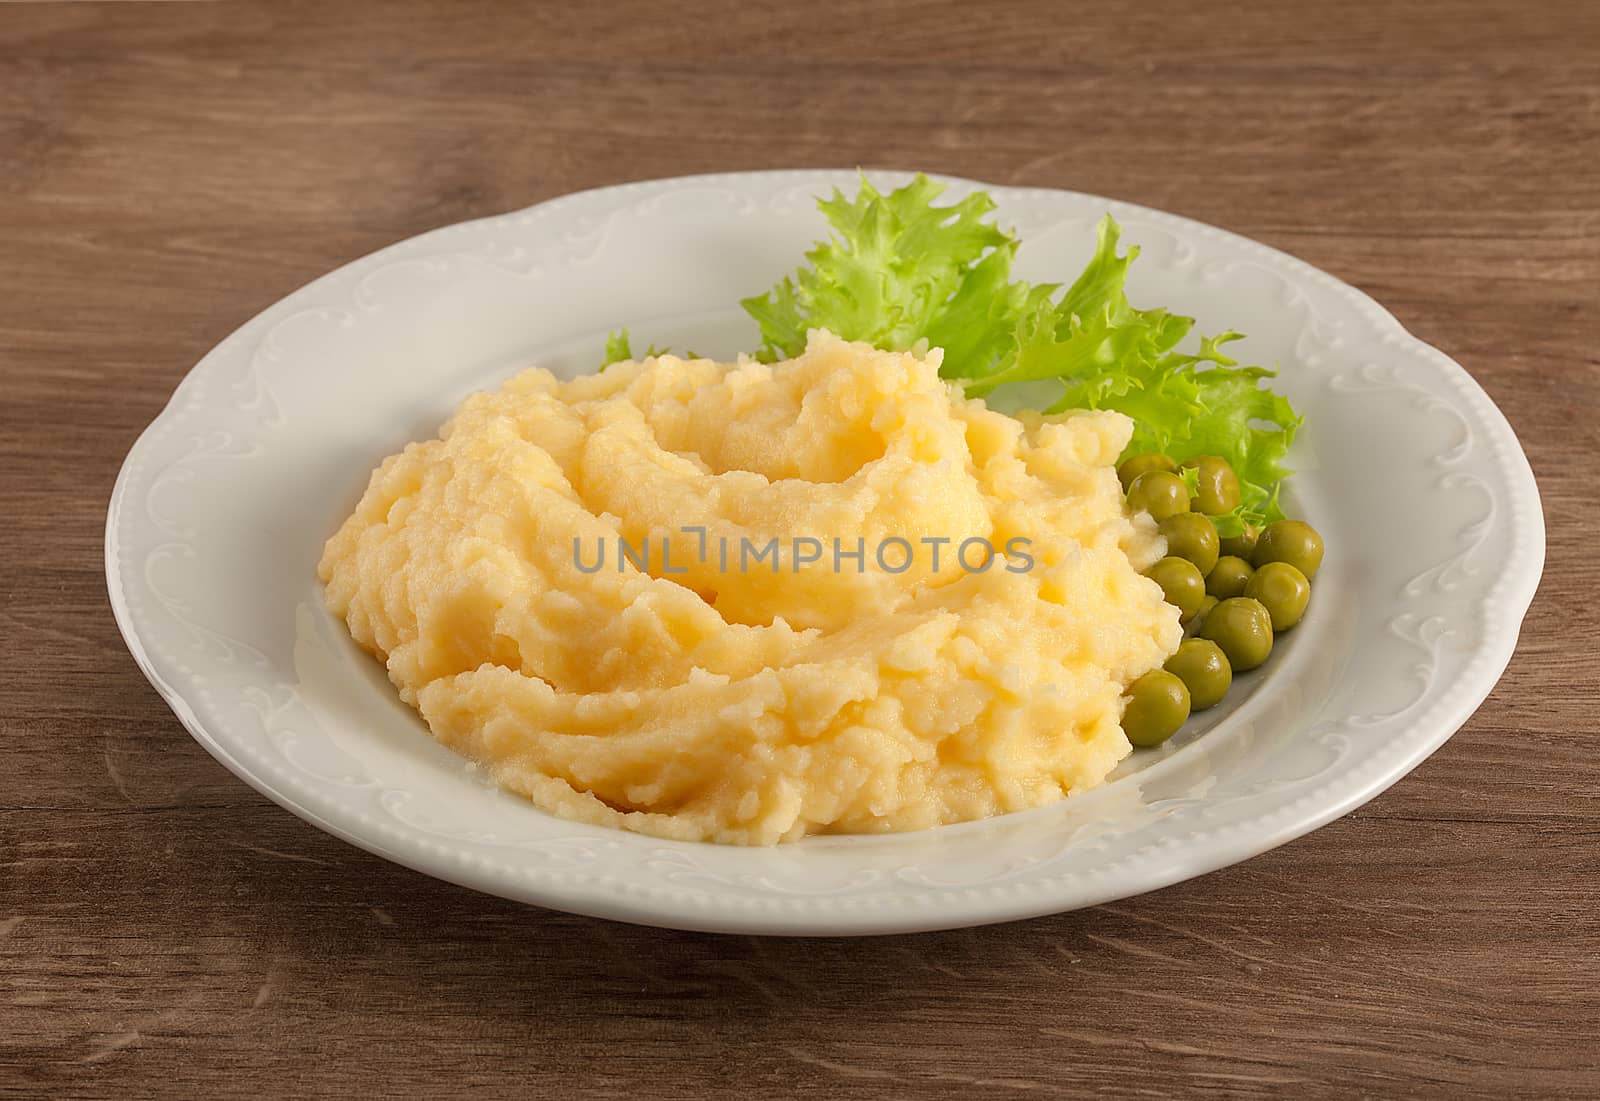 Mashed potatoes with green peas and lettuce by Angorius